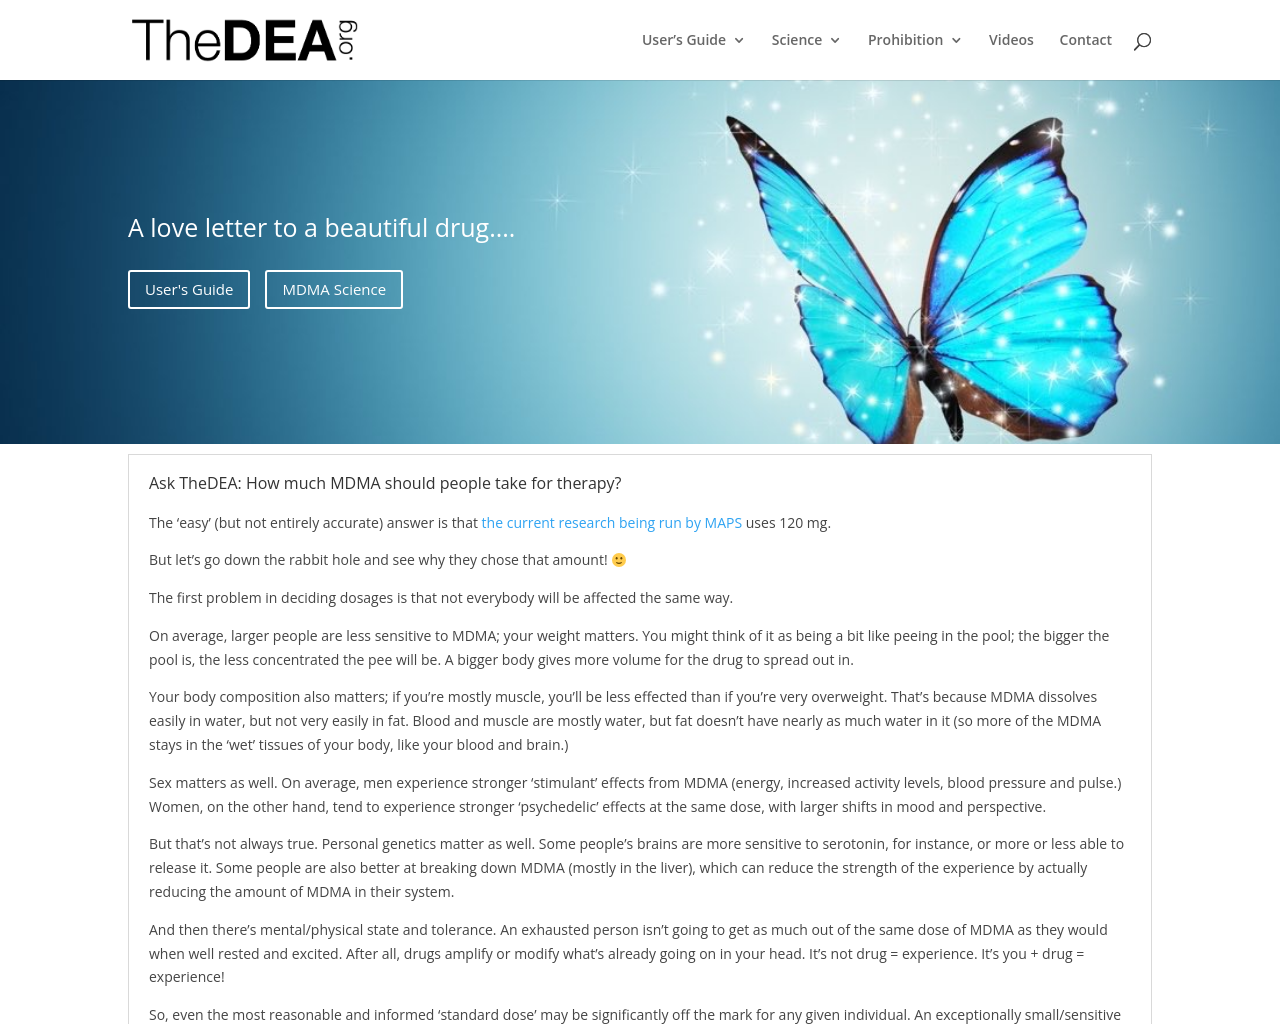 thedea.org